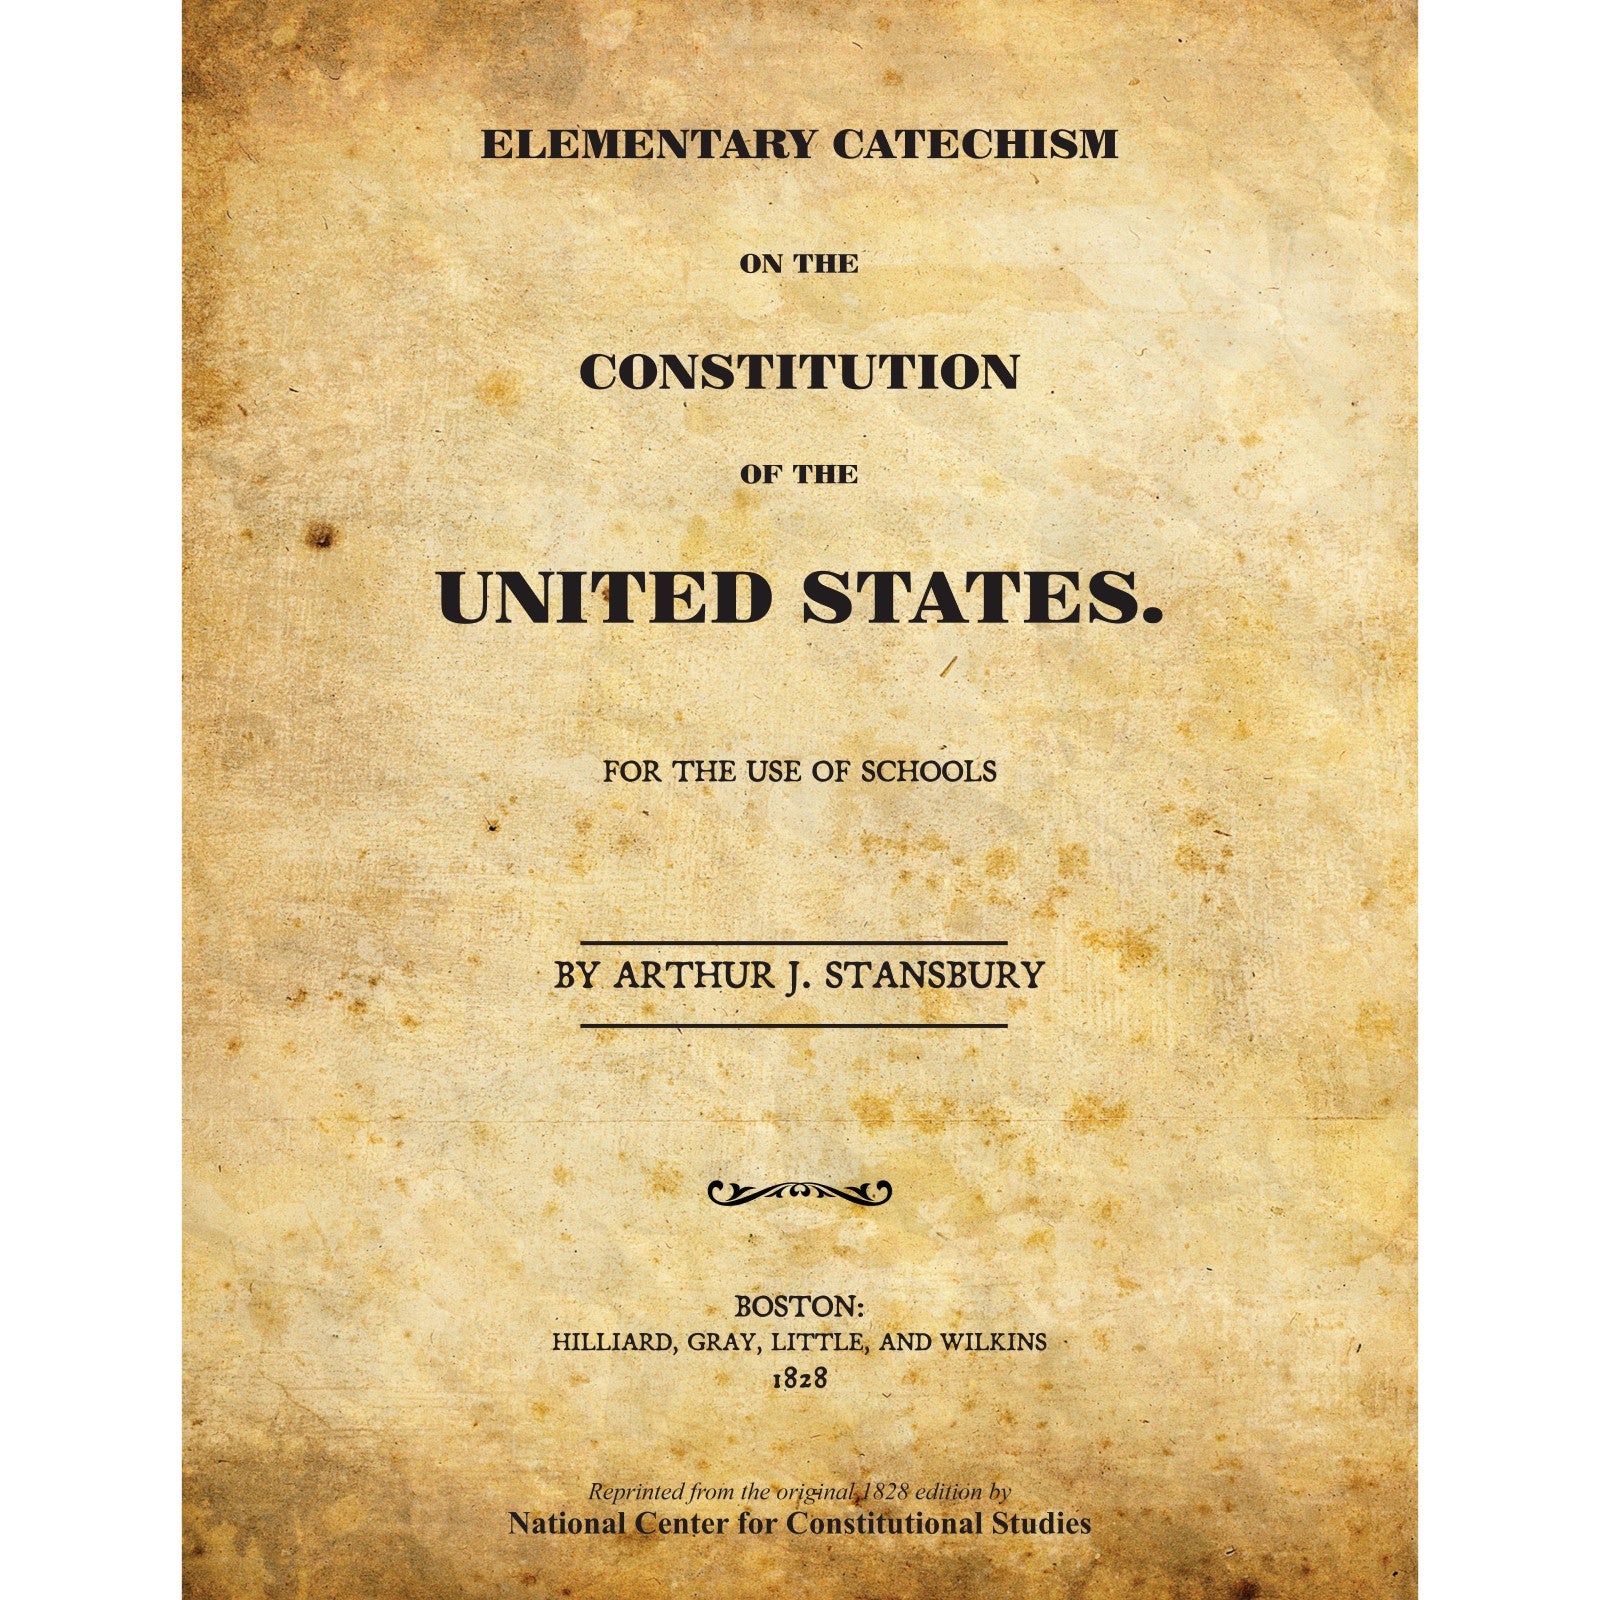 Catechism on the U.S. Constitution